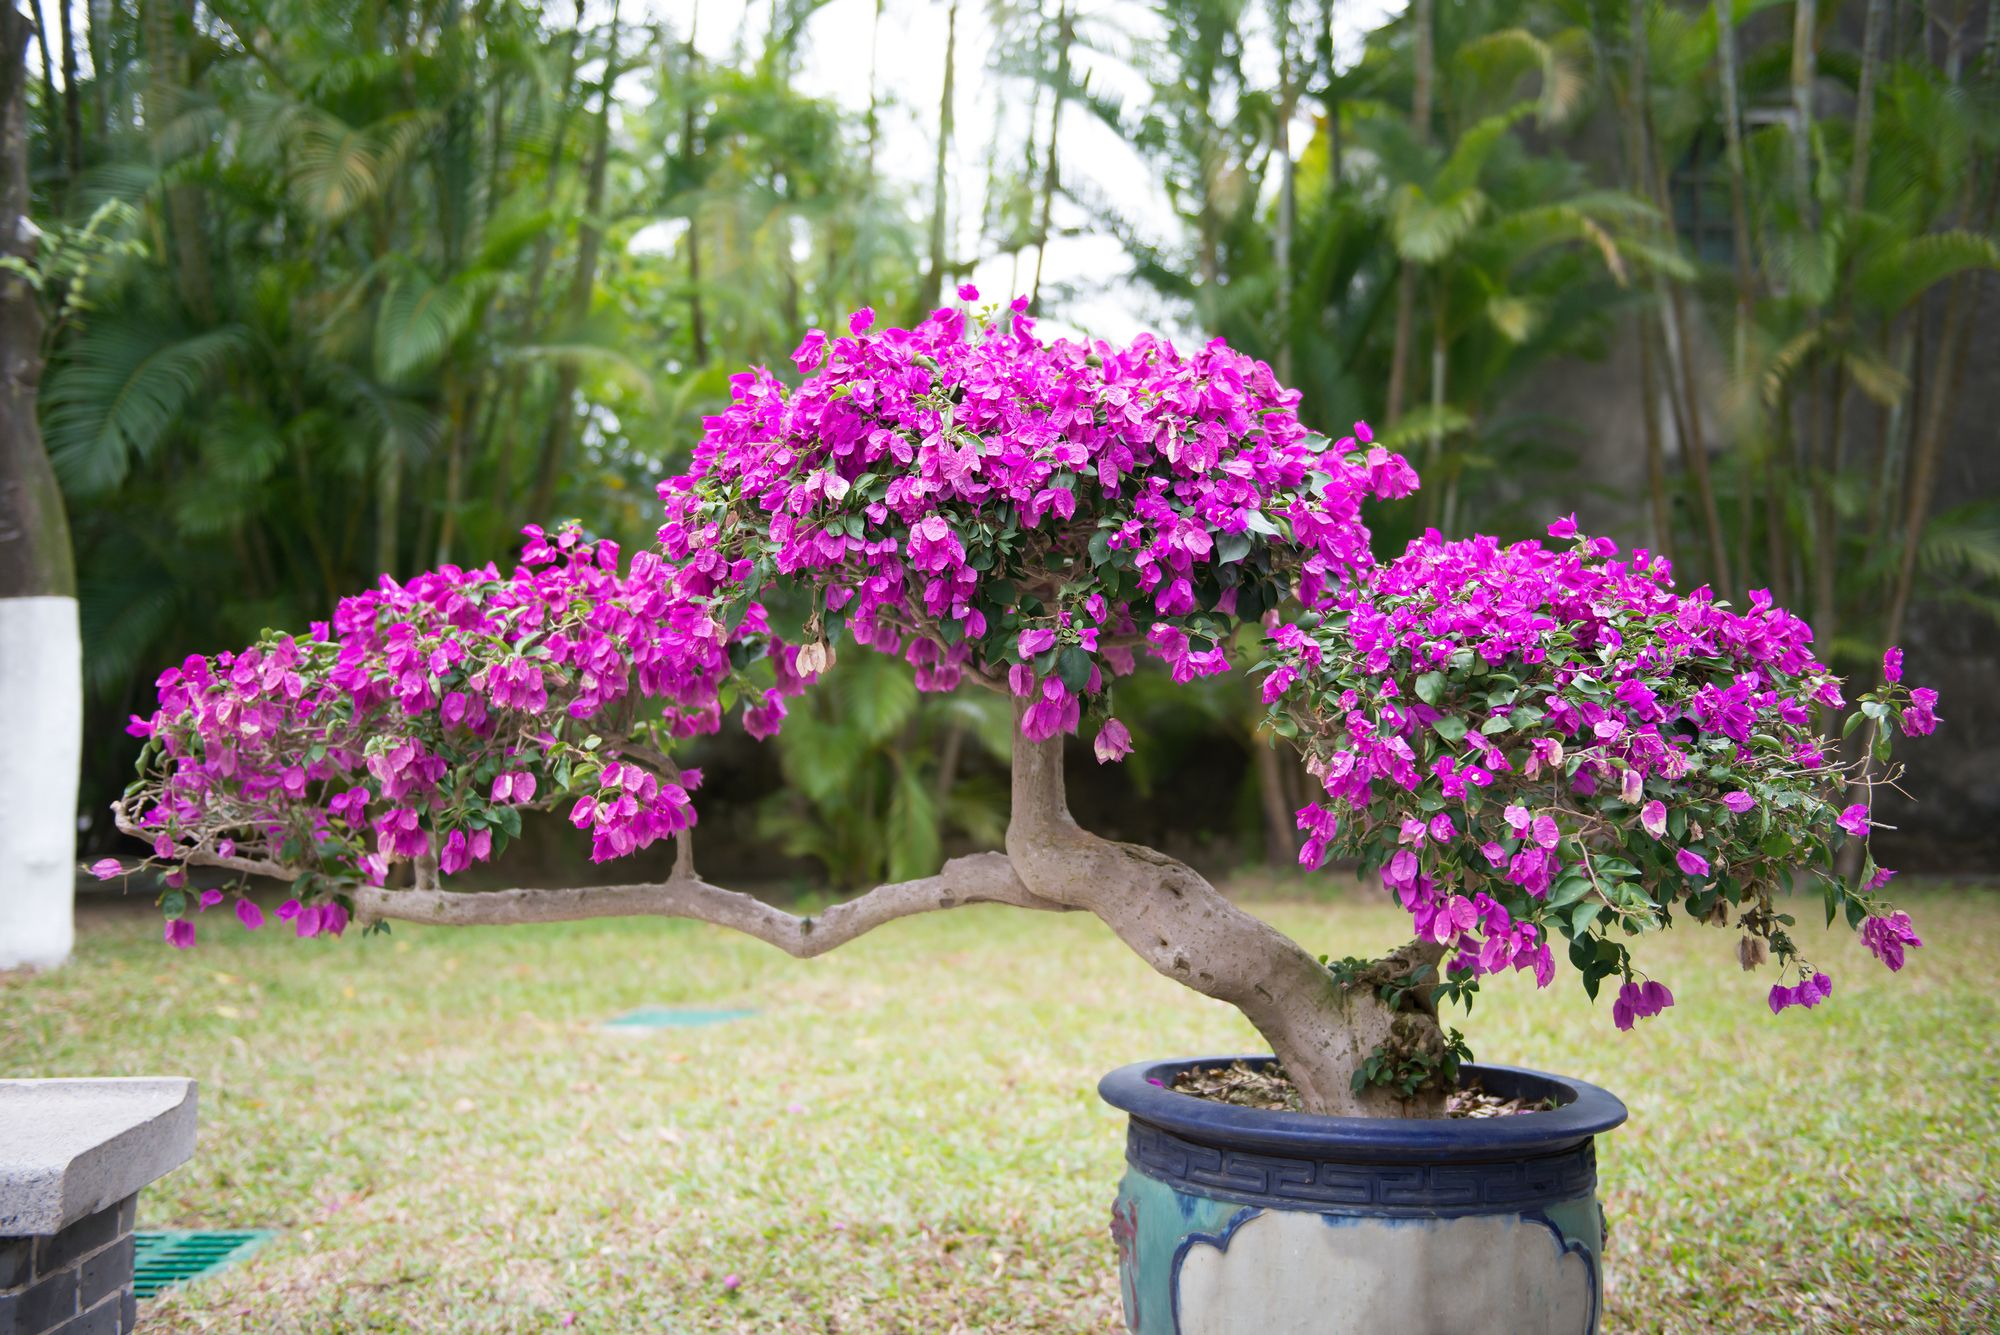 Slanting bonsai trunk blossoming in purple colored flowers planted in a pot situated outside